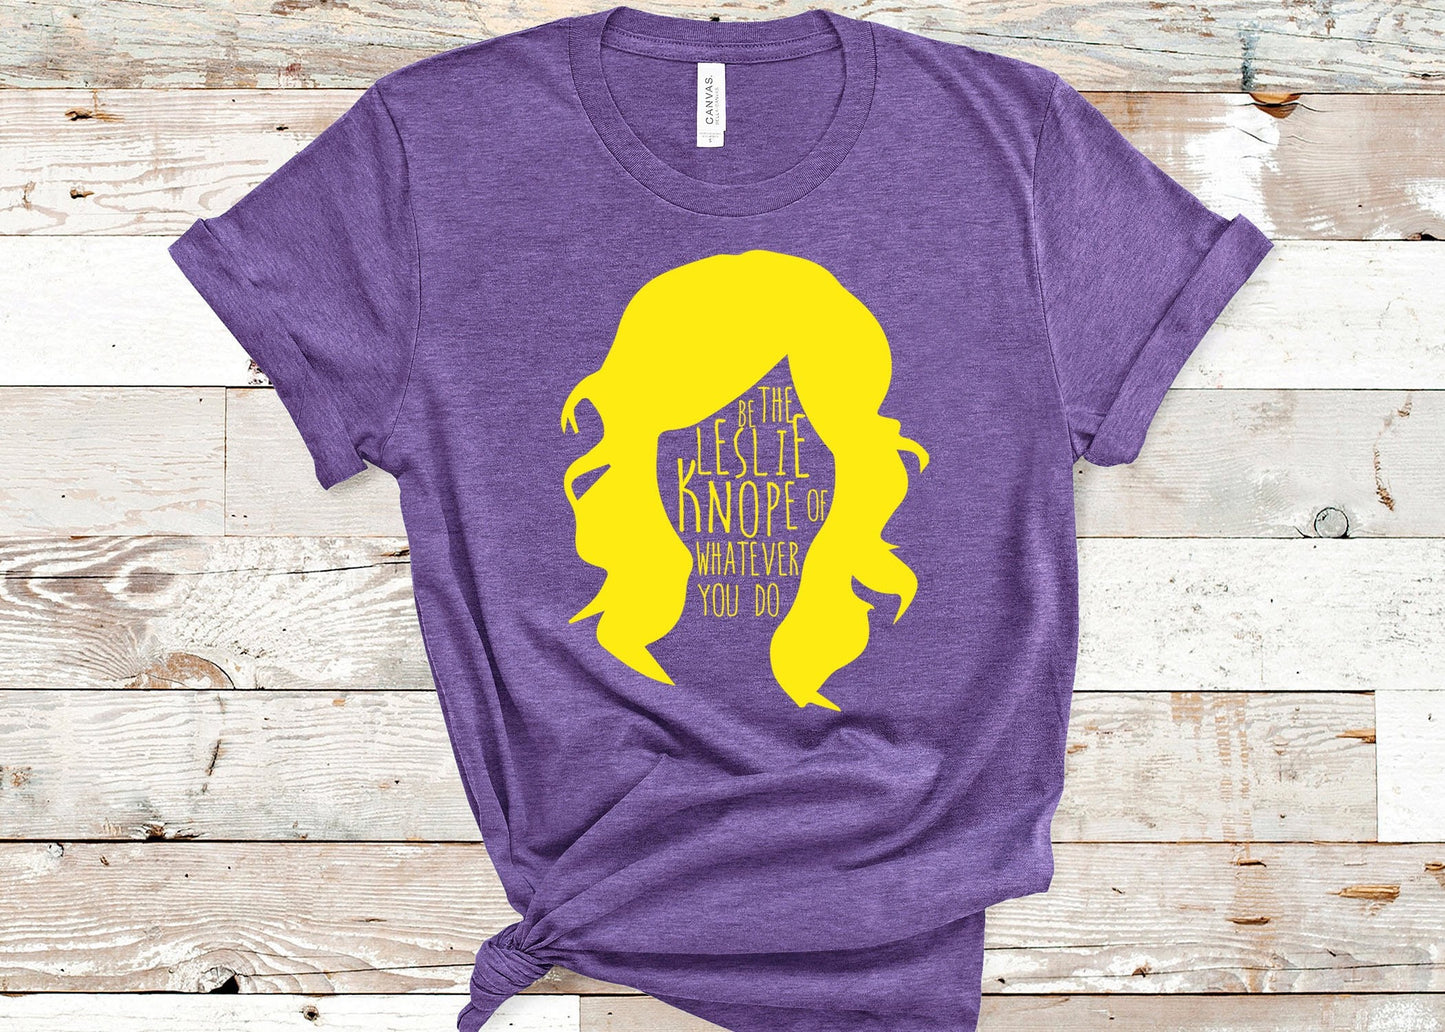 Leslie Knope T-shirt - Parks and Recreation -Be the Leslie Knope- Unisex Adults - Funny Gift